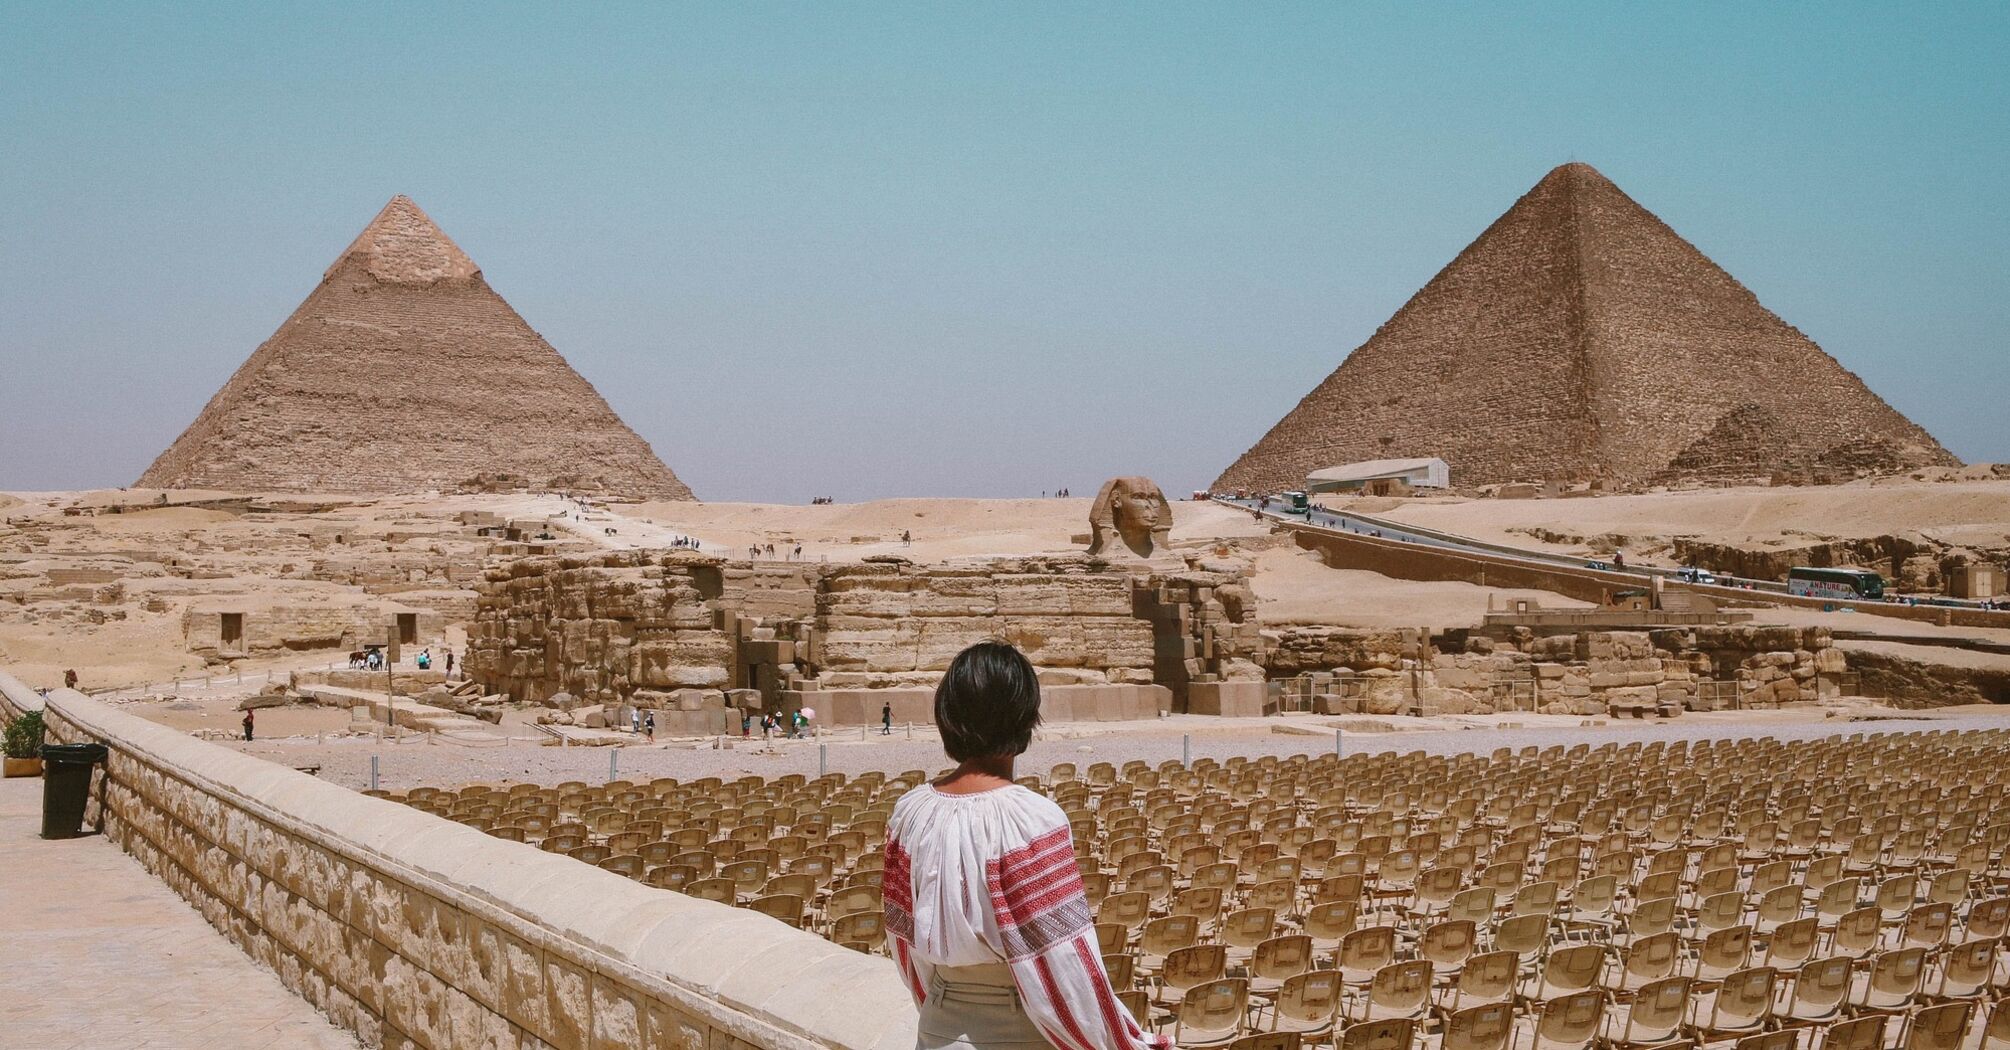 Trip to Egypt: Add these unusual places to the itinerary